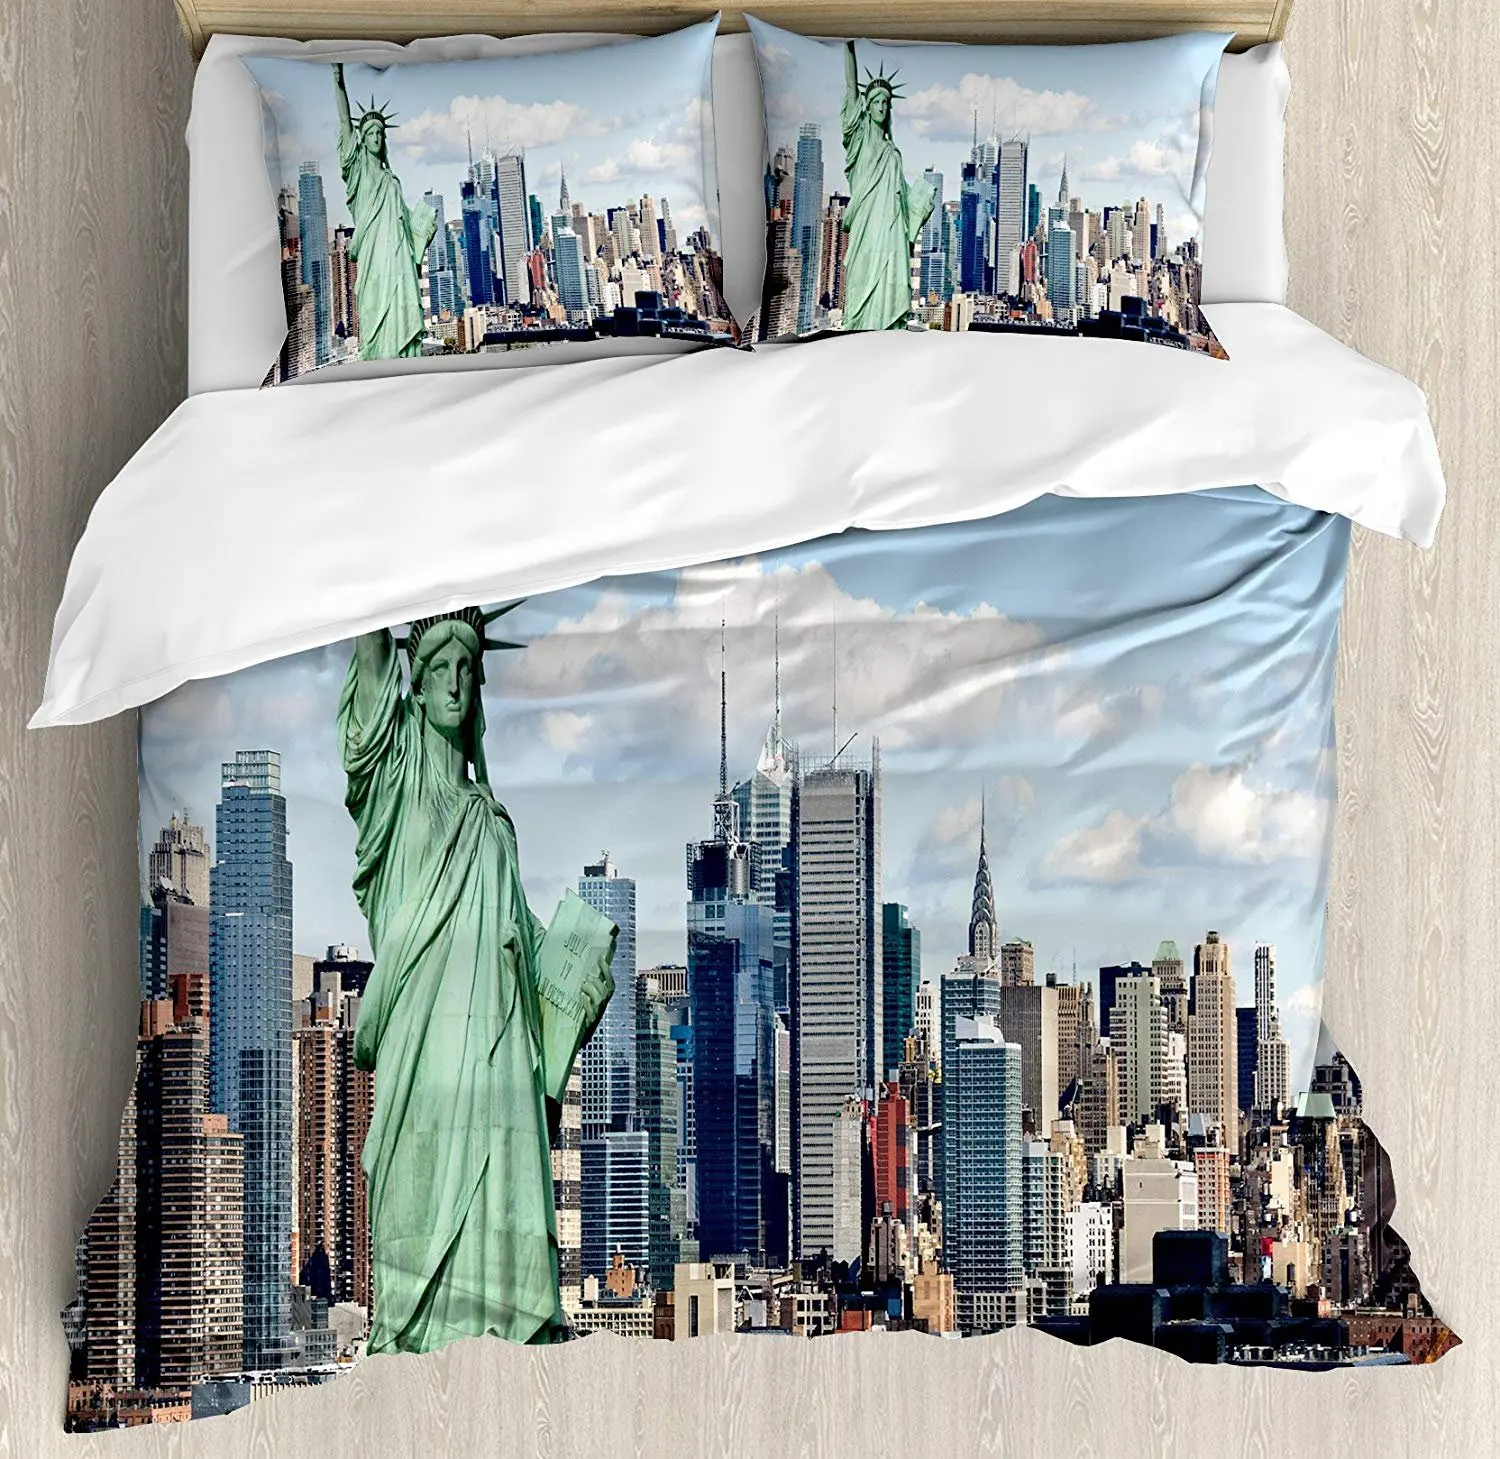 

New York Bedding Set Statue of Liberty in NYC Harbor Urban City Famous Cultural Landmark Duvet Cover Pillowcase Bed Set